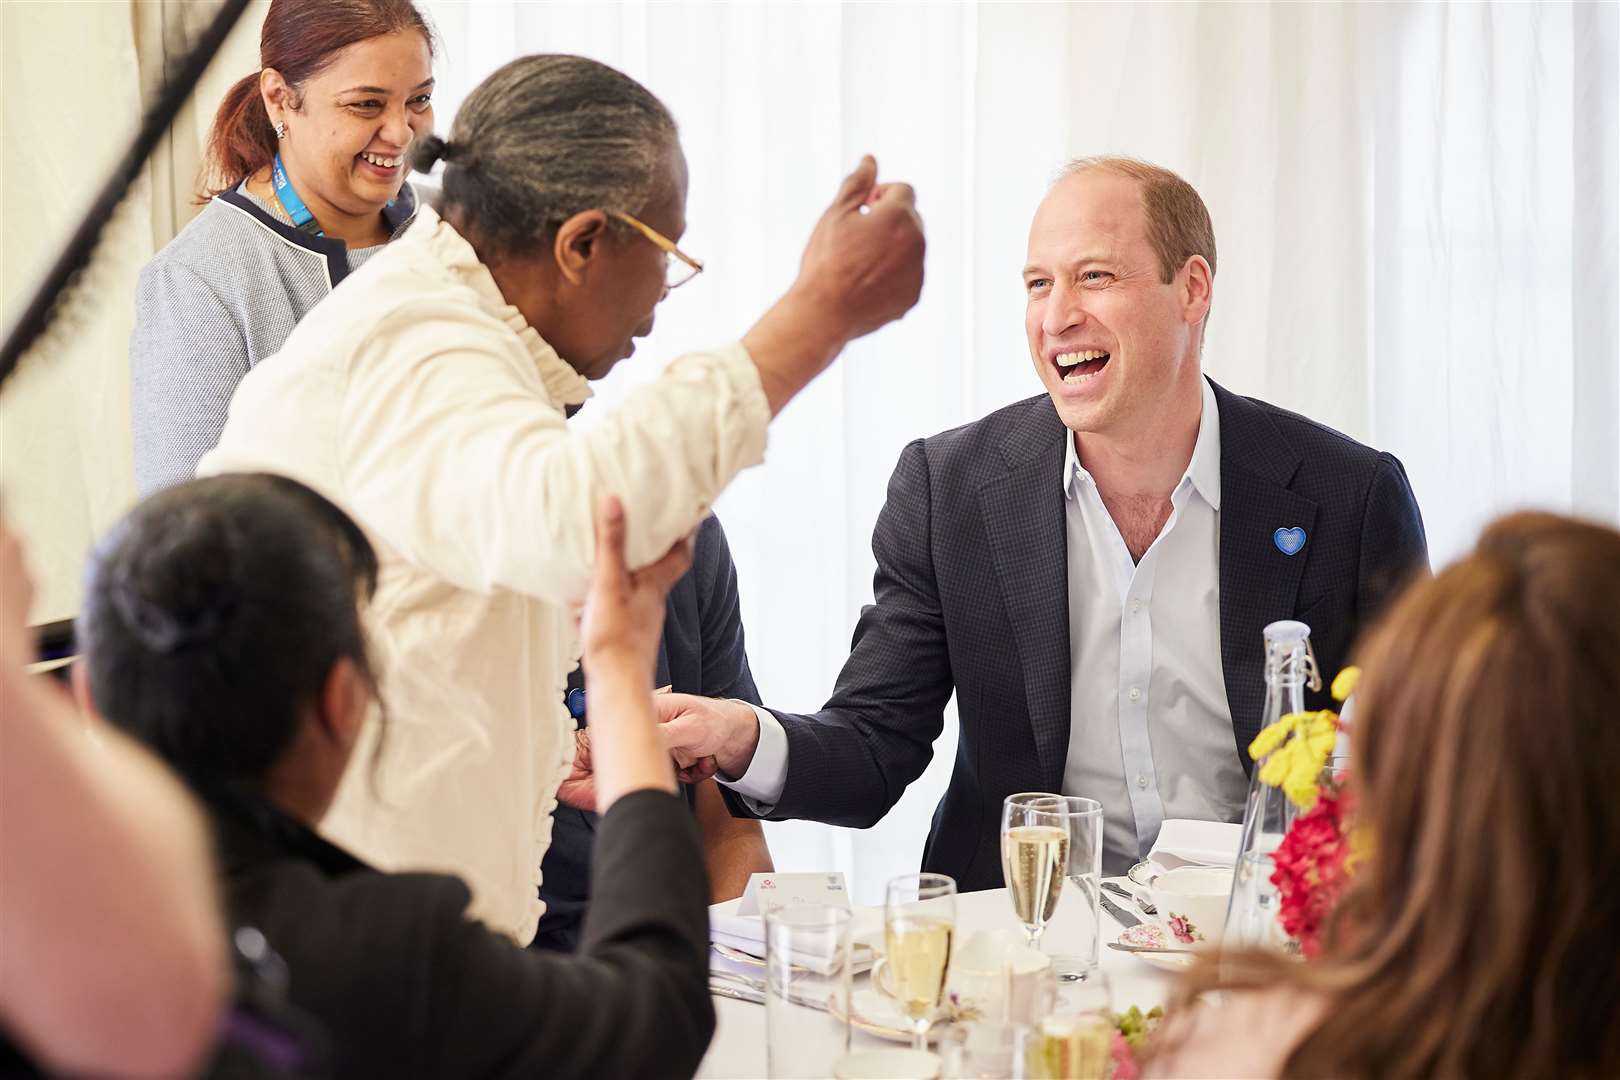 William enjoying the party at St Thomas’ Hospital (Tom Dymond/NHS Charities Together/PA)